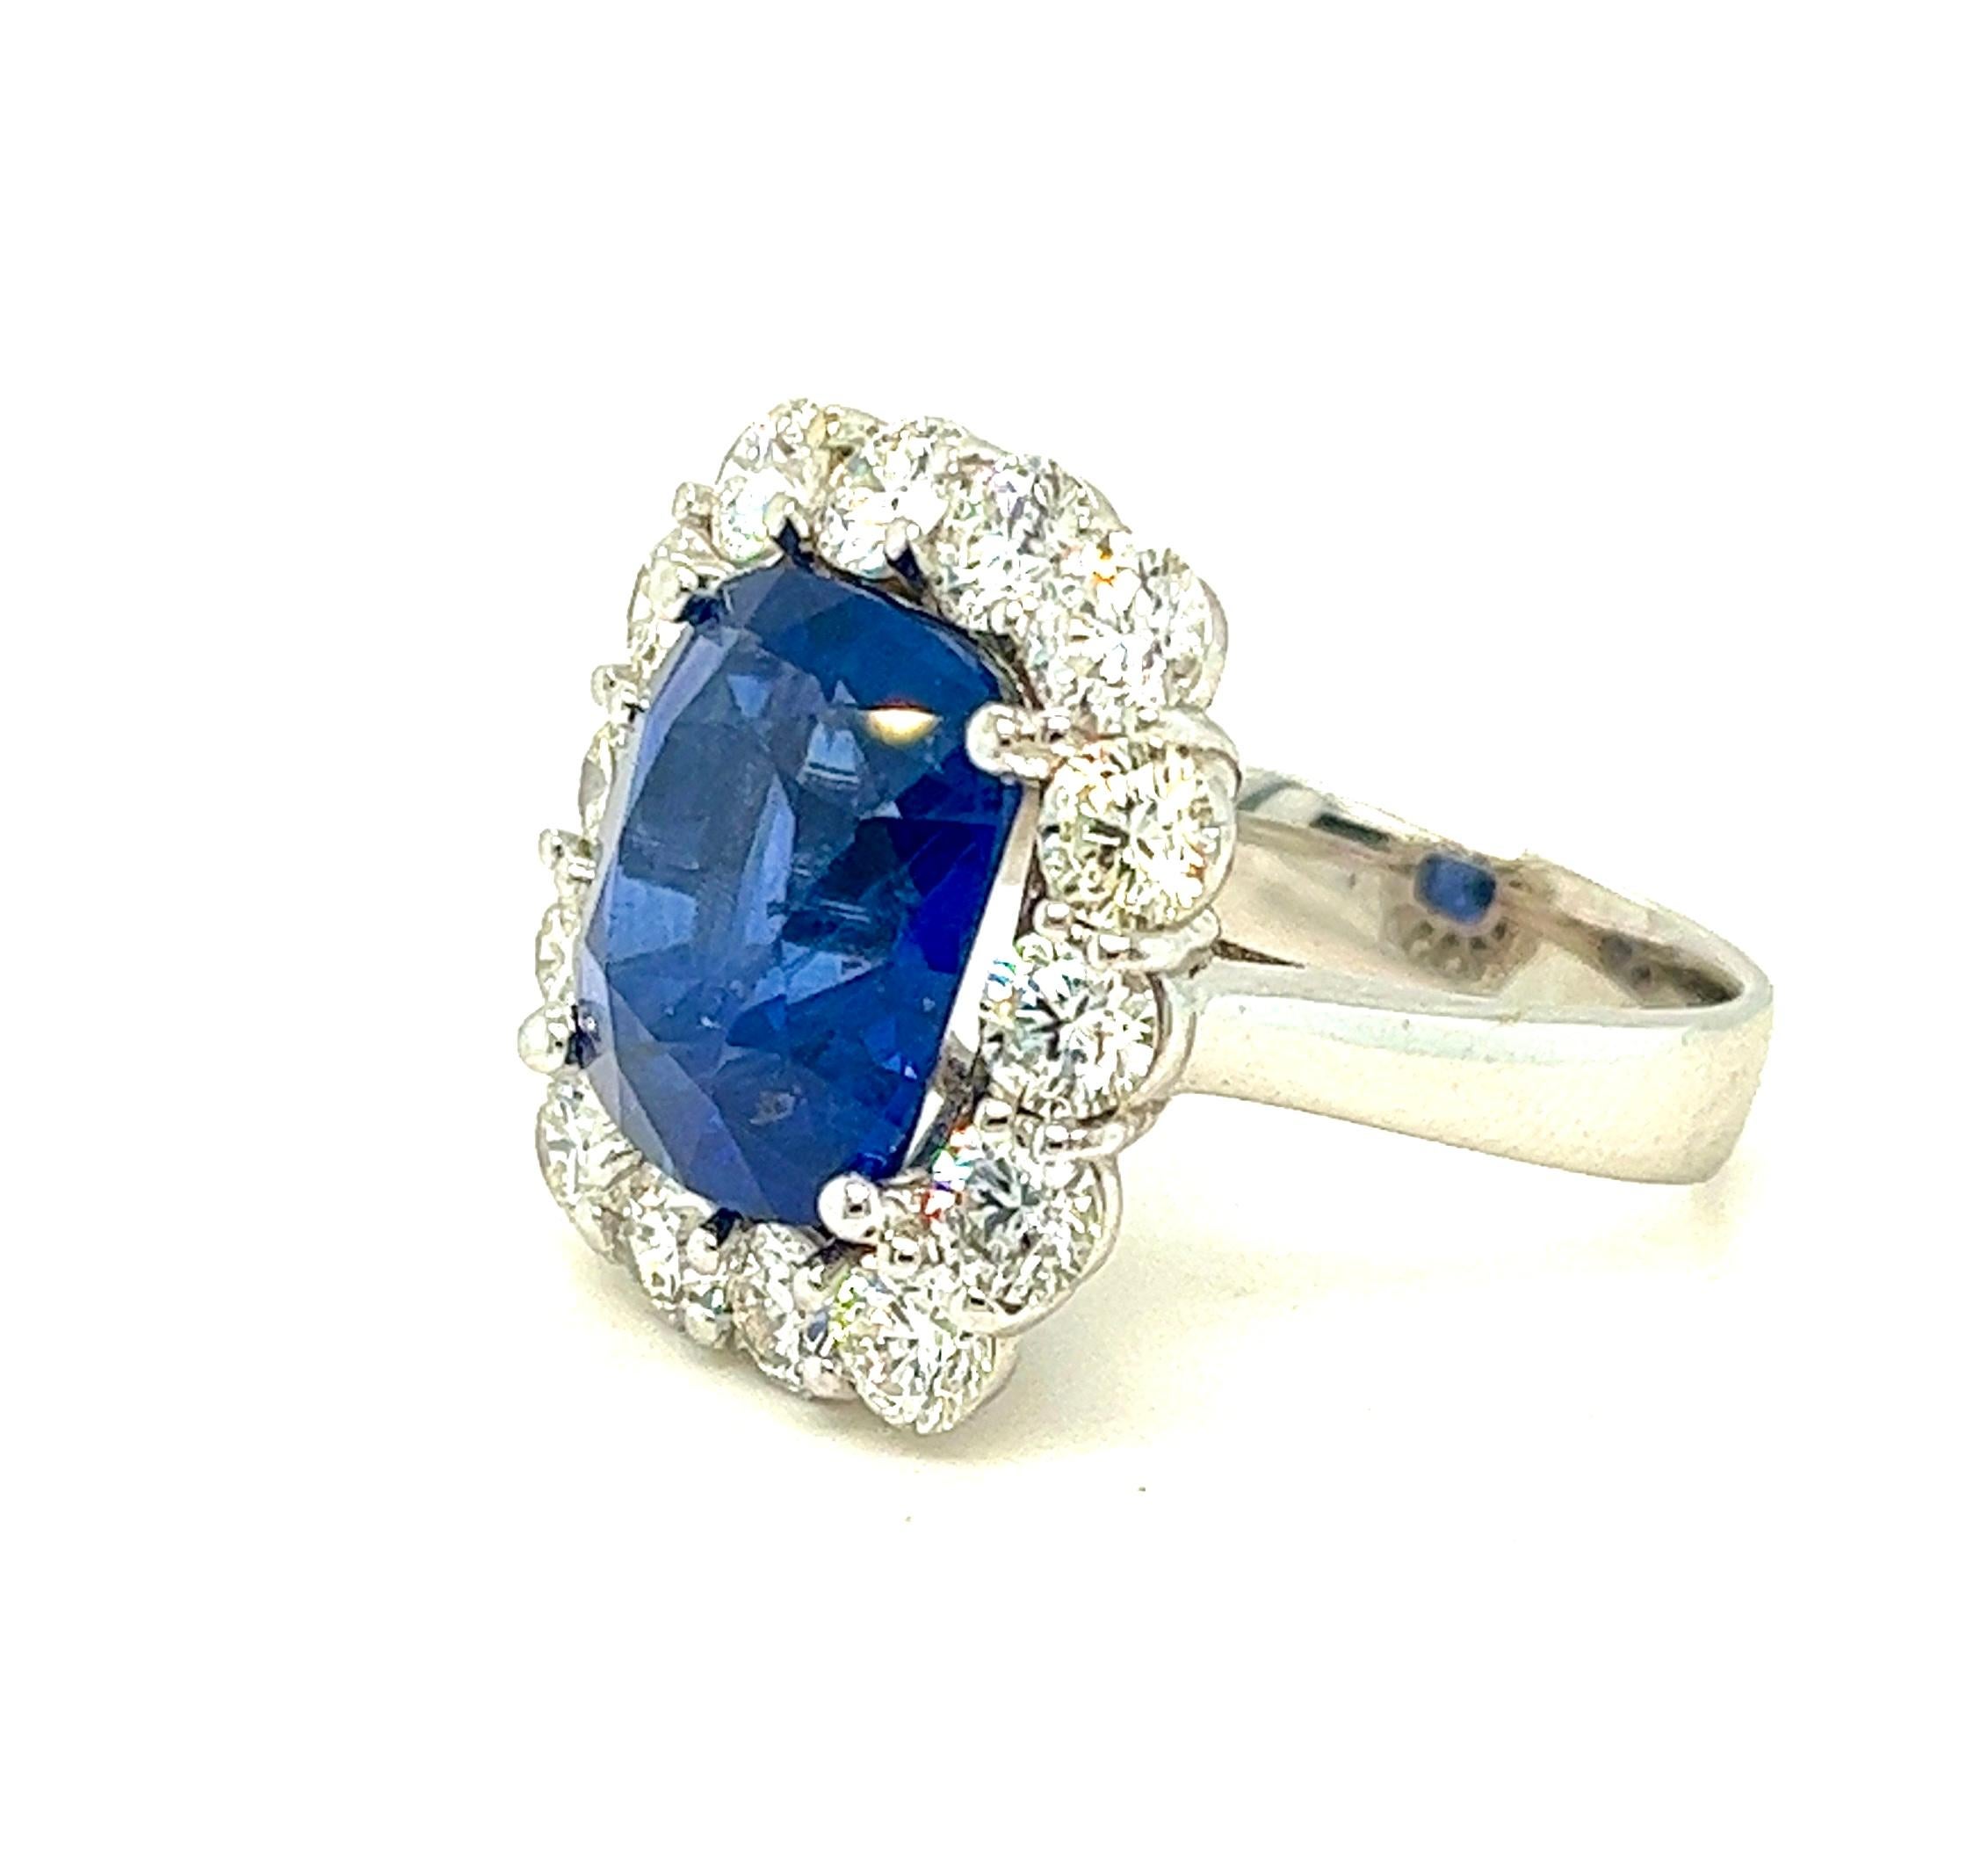 Exquisite 11.87 Carat Natural Sapphire and Diamond Cocktail Ring In New Condition For Sale In Miami, FL